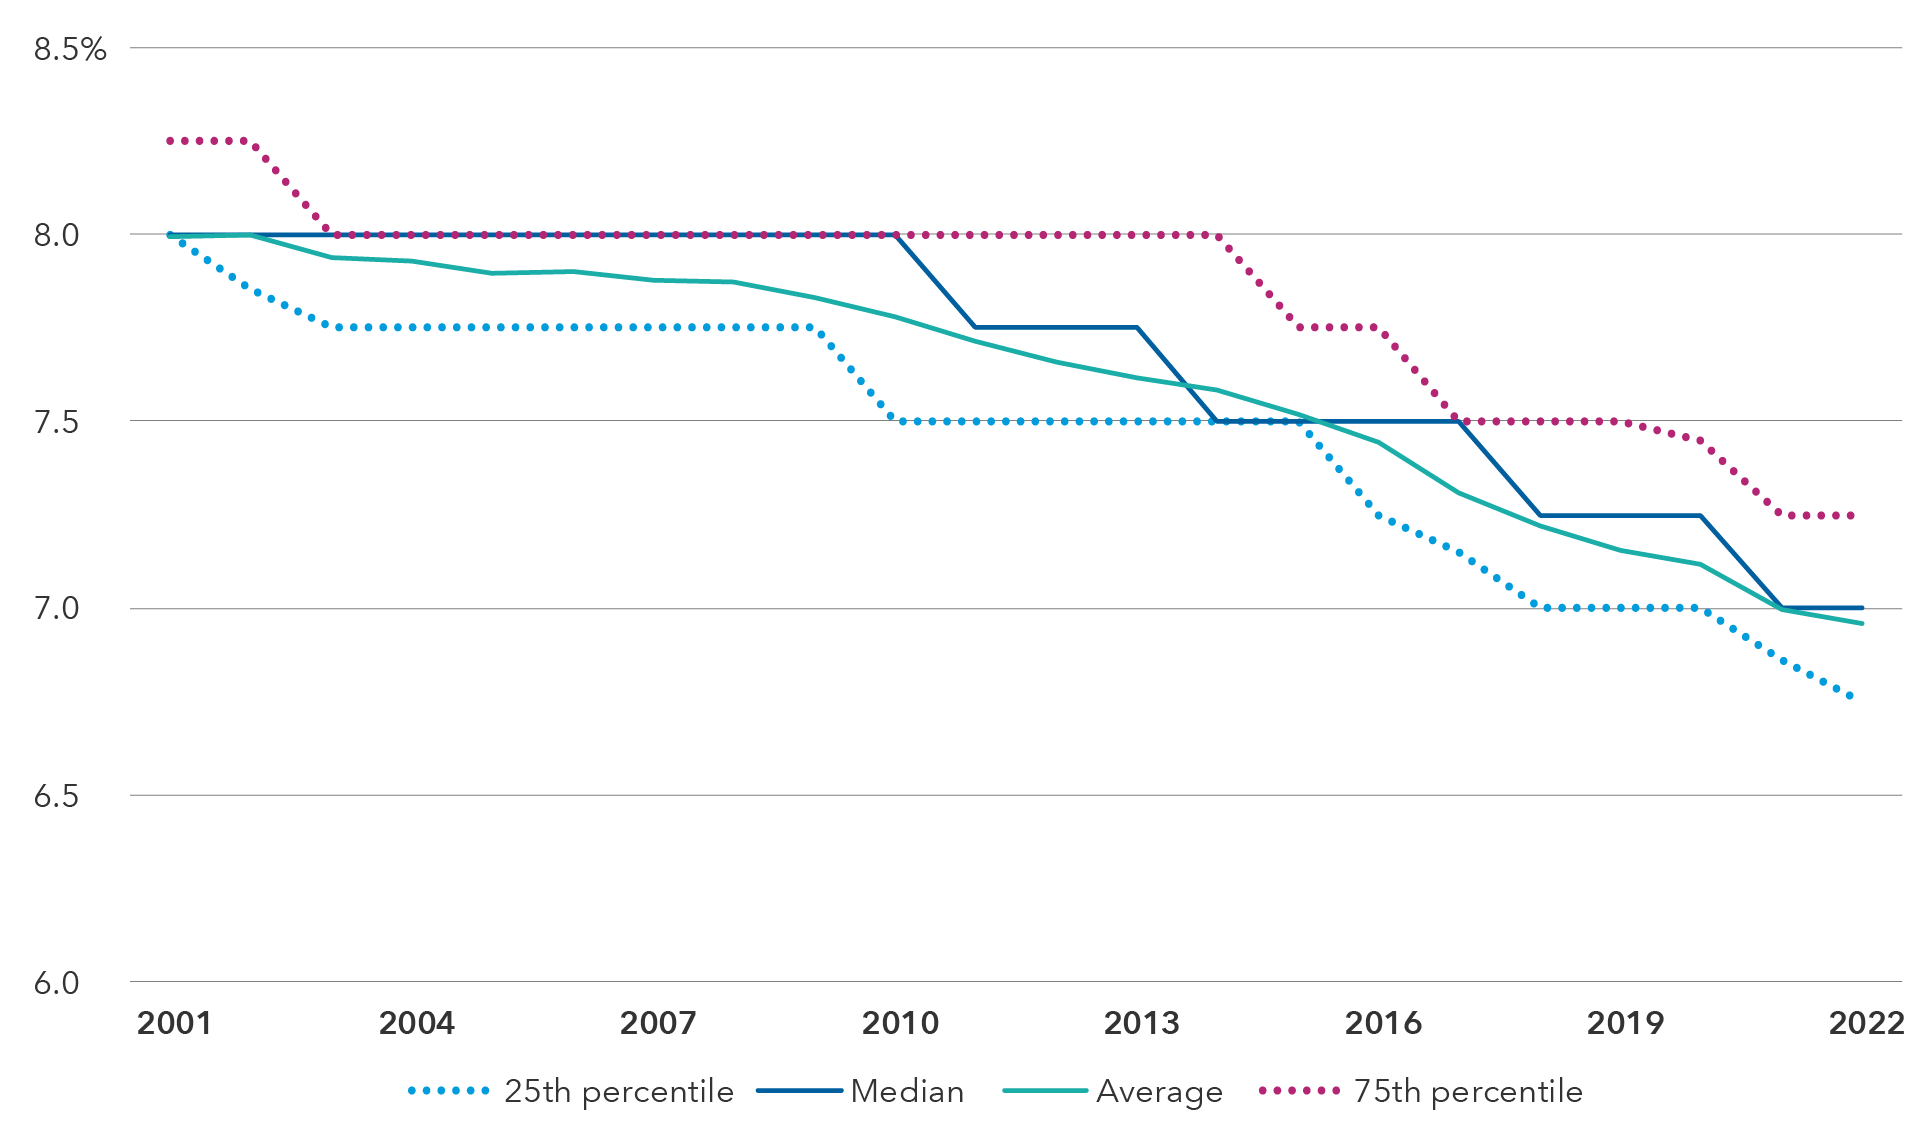 Line chart displays public pension plans’ return targets from 2001 through 2022. It shows that both the average and median targets fell to 7.0% in 2022 from 8.0% in 2001. Over the same period, the targets of plans in the 25th percentile fell to 6.8% from 8.0%. For plans in the 75th percentile, the target fell to 7.3% from 8.3%. 